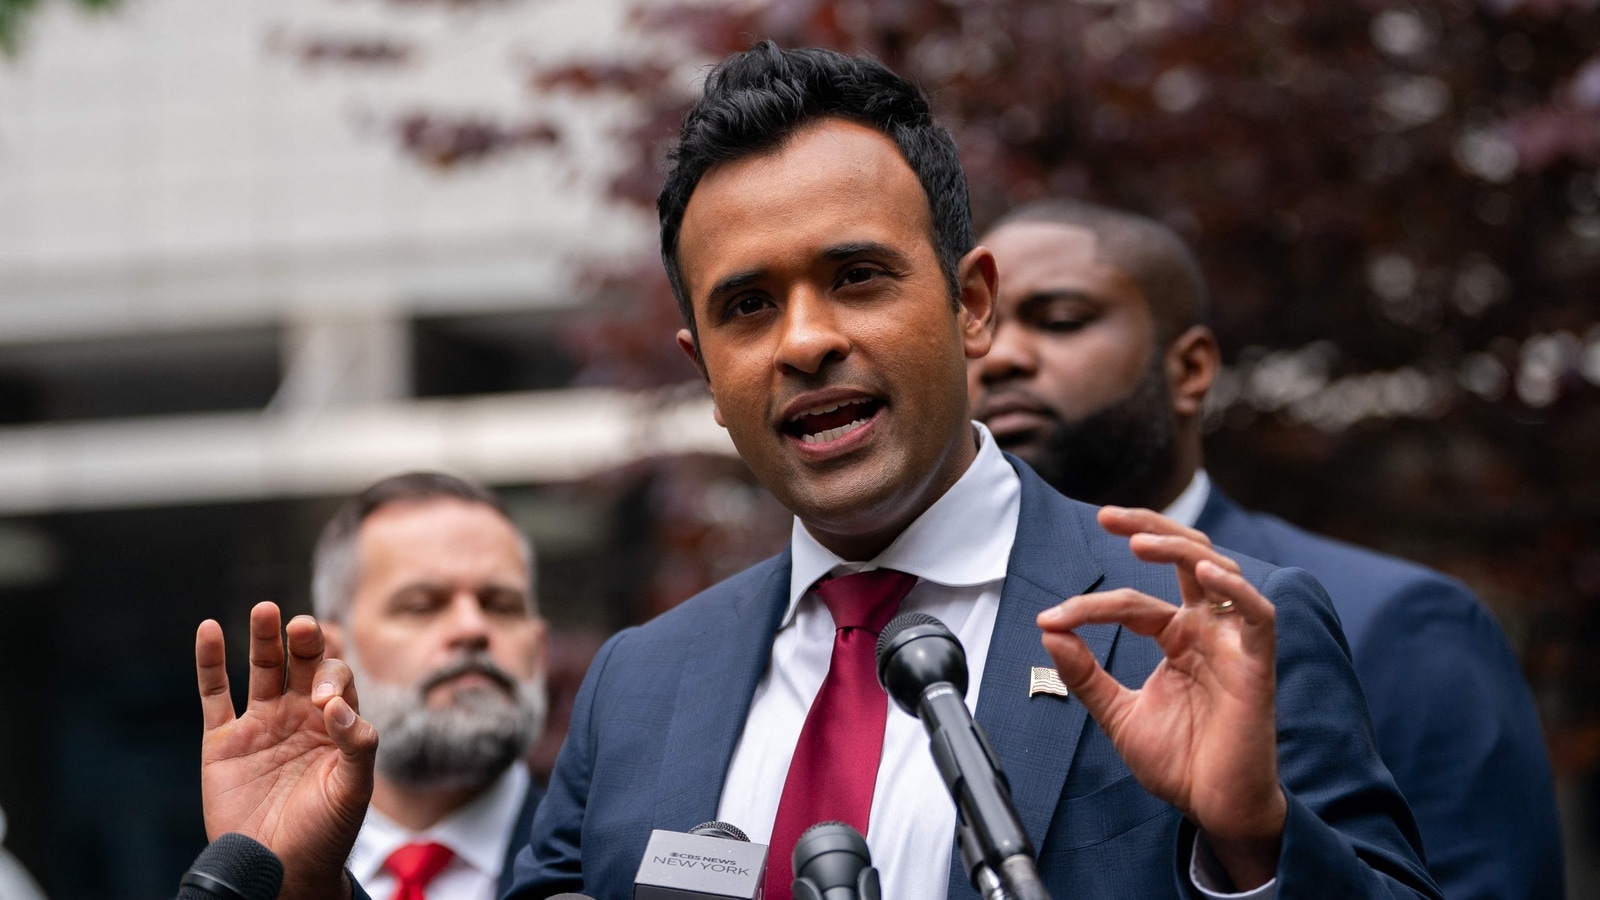 Vivek Ramaswamy with the Freudian slip calling Donald Trump a ‘sham politician’ outside New York court